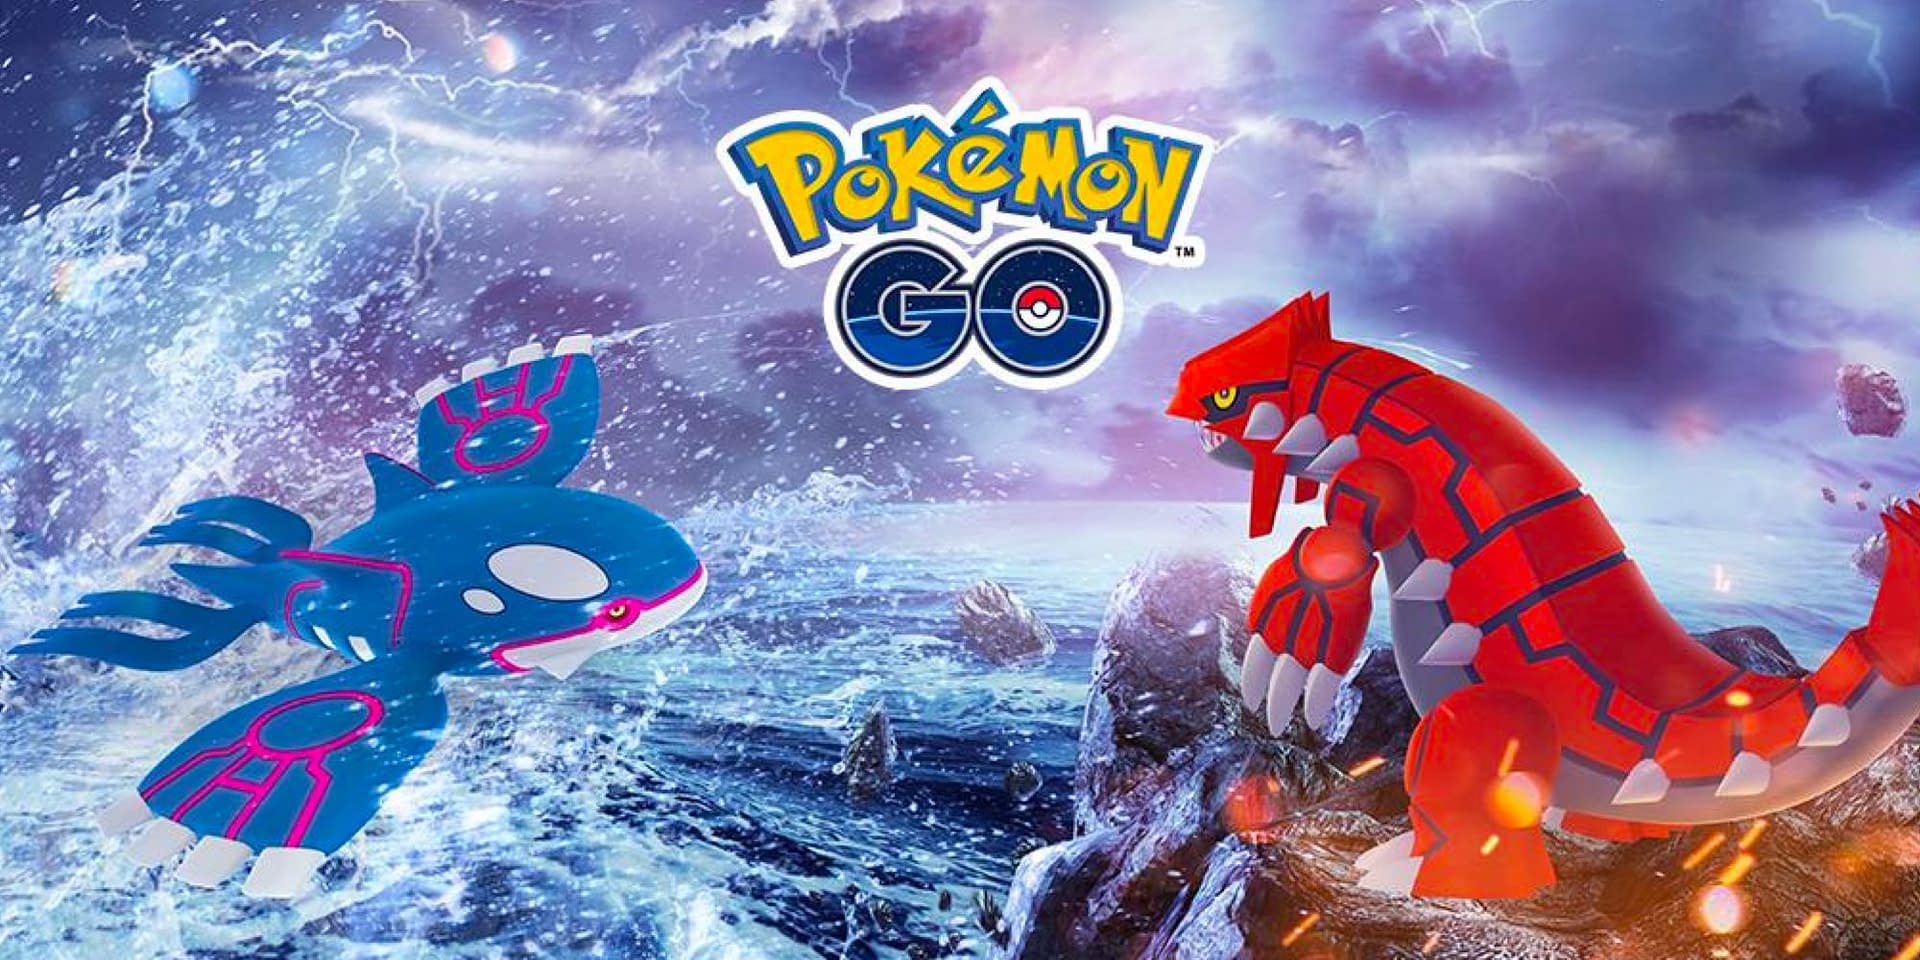 What is a 6-Star Raid in Pokémon Go? - Pro Game Guides